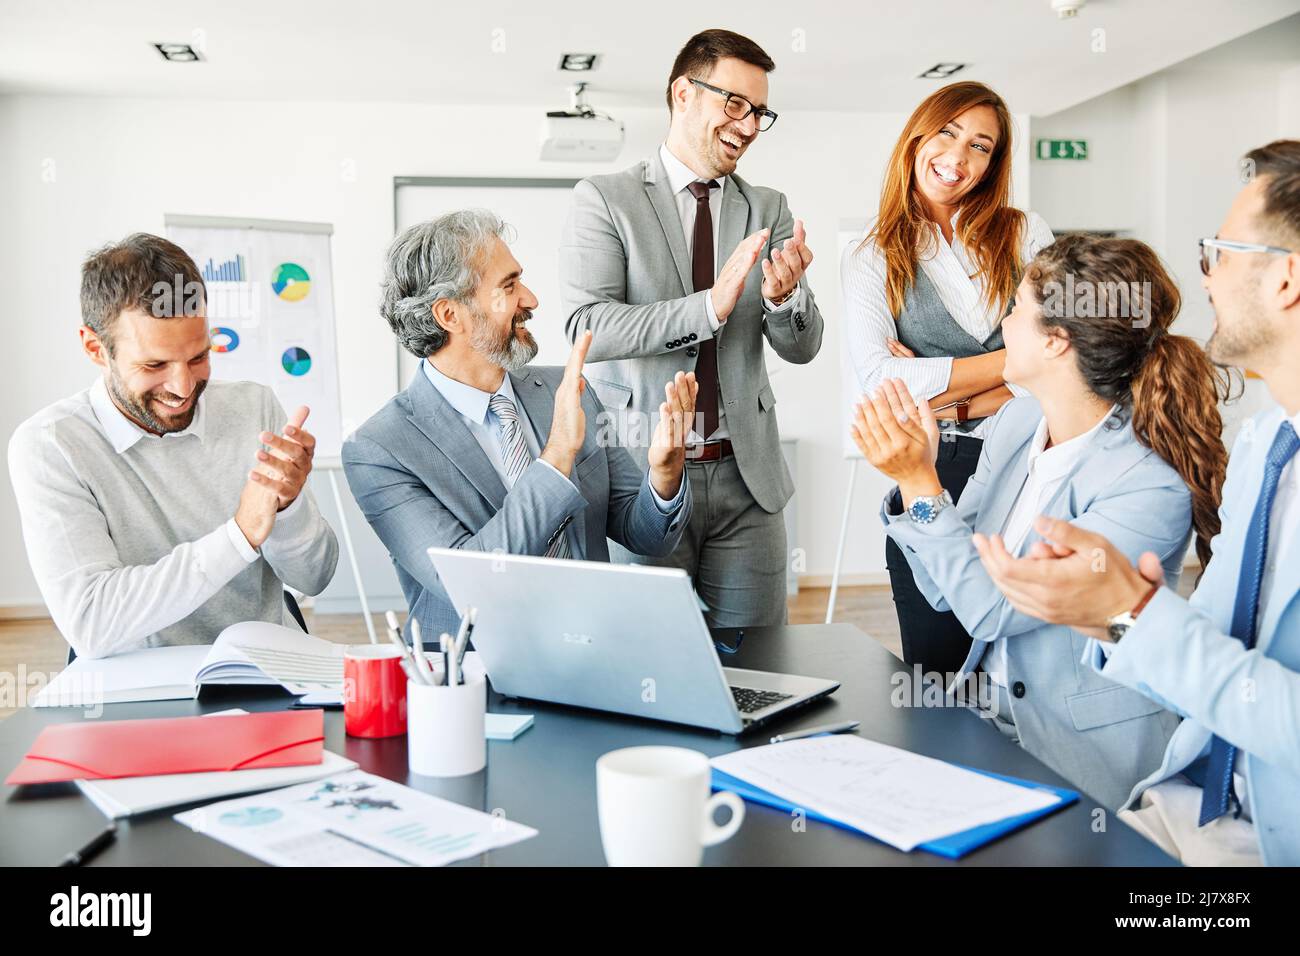 business meeting applauding clapping support congratulation office conference team teamwork Stock Photo